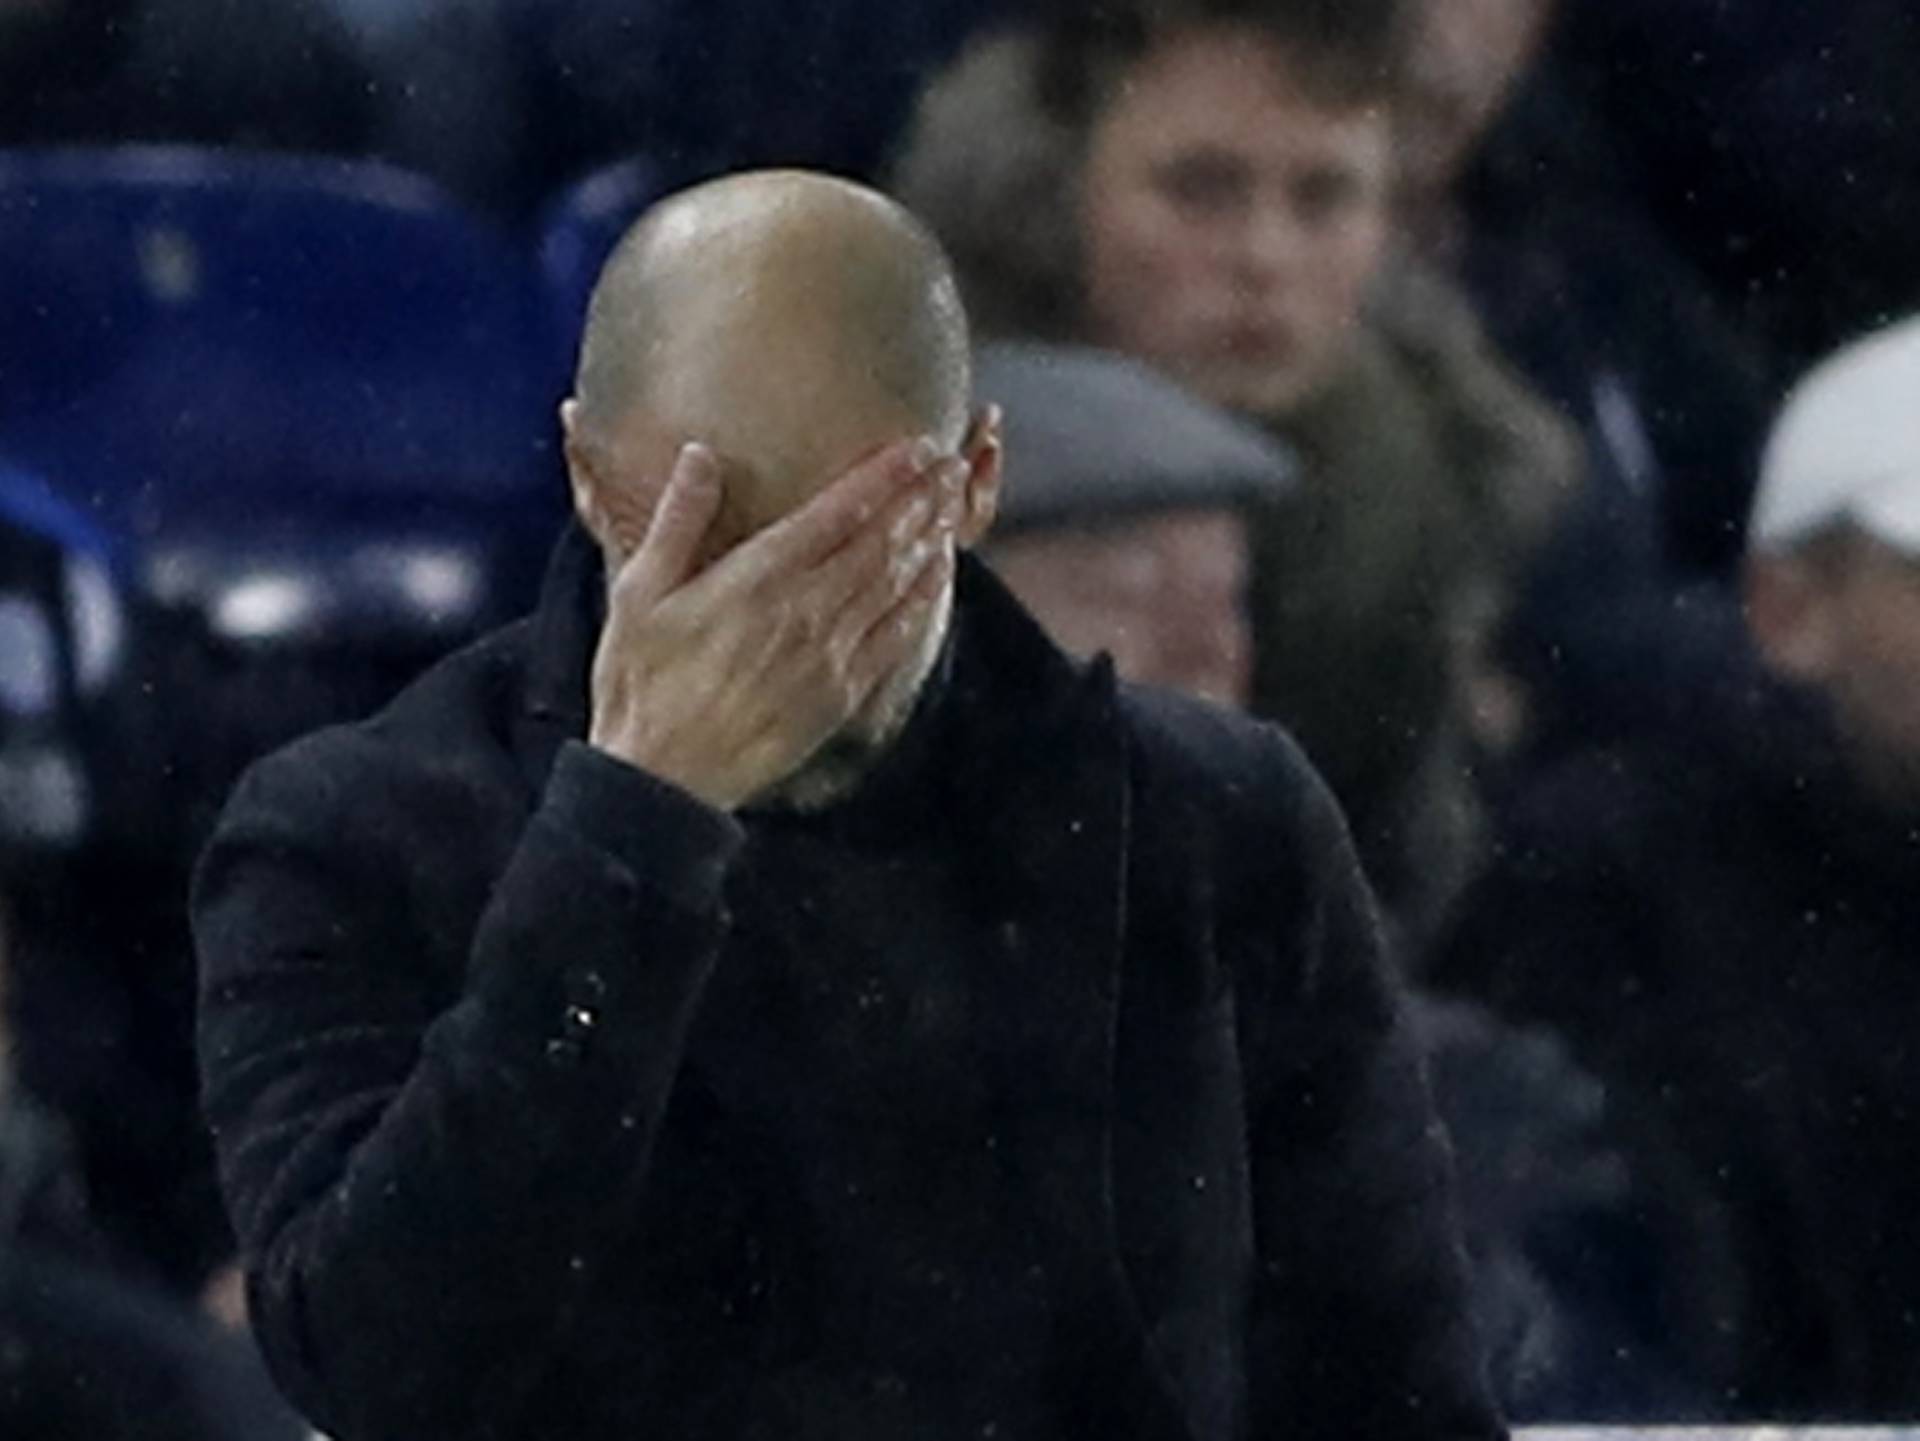 Manchester City manager Pep Guardiola looks dejected